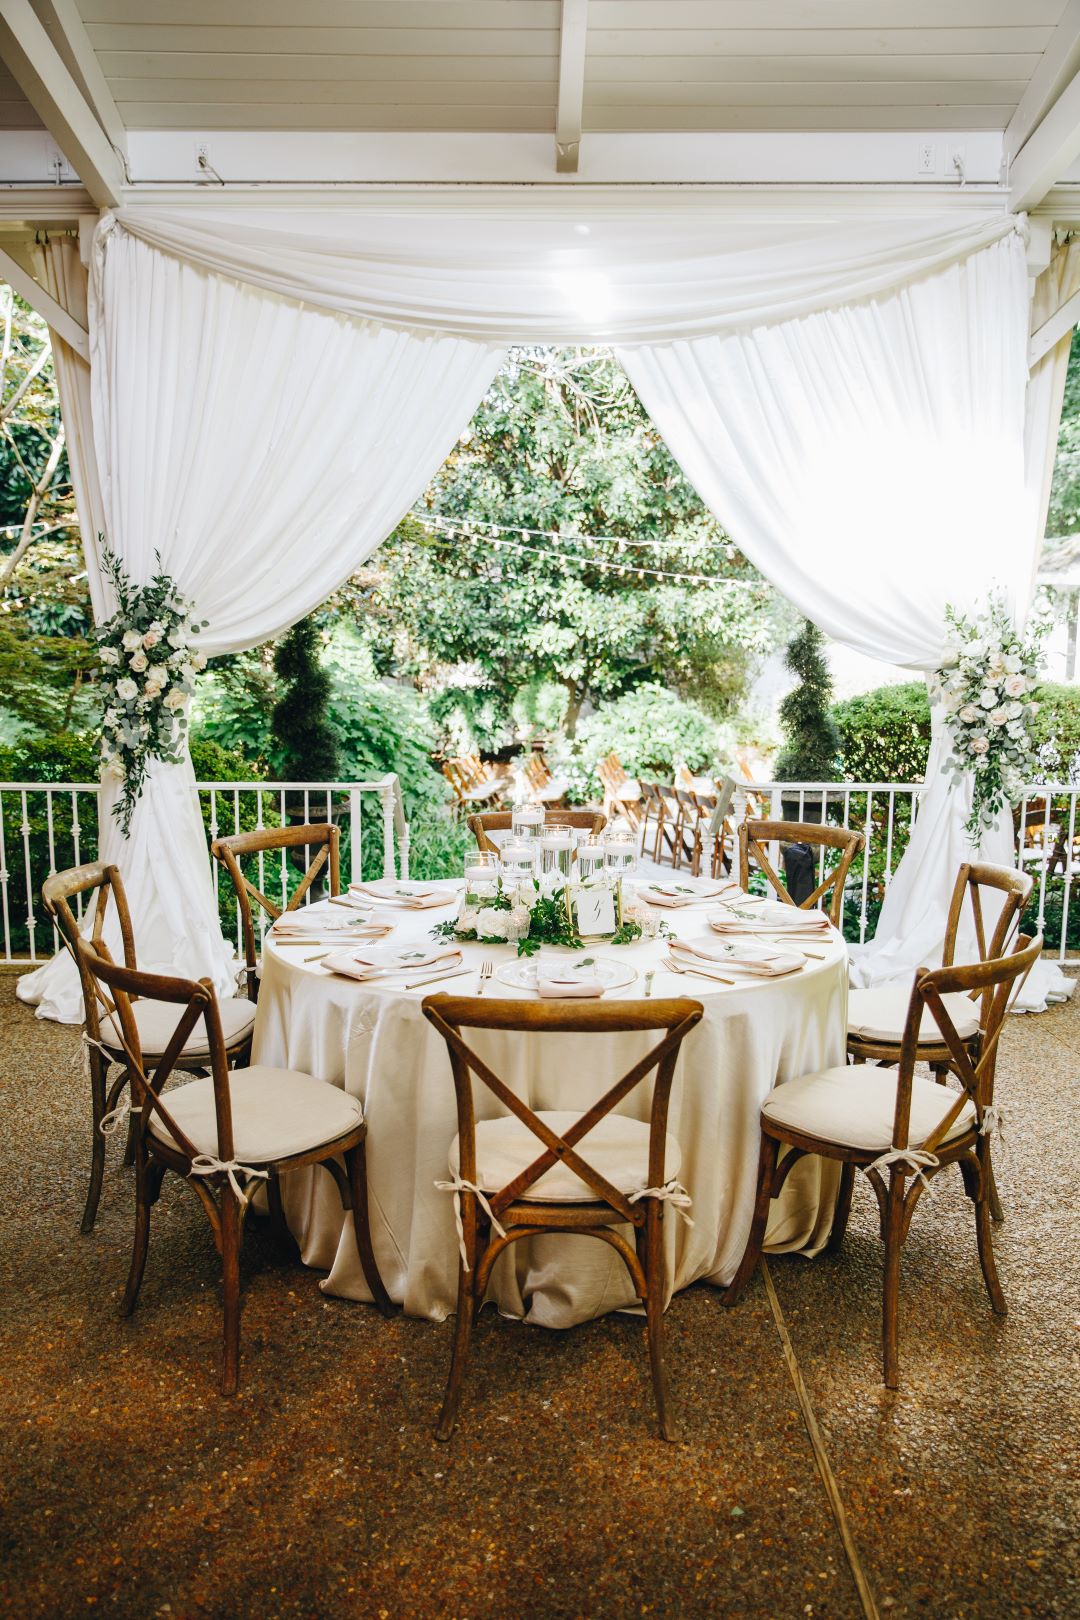 Table setting with rose accents at earthy summer garden wedding in September, neutrals & greenery